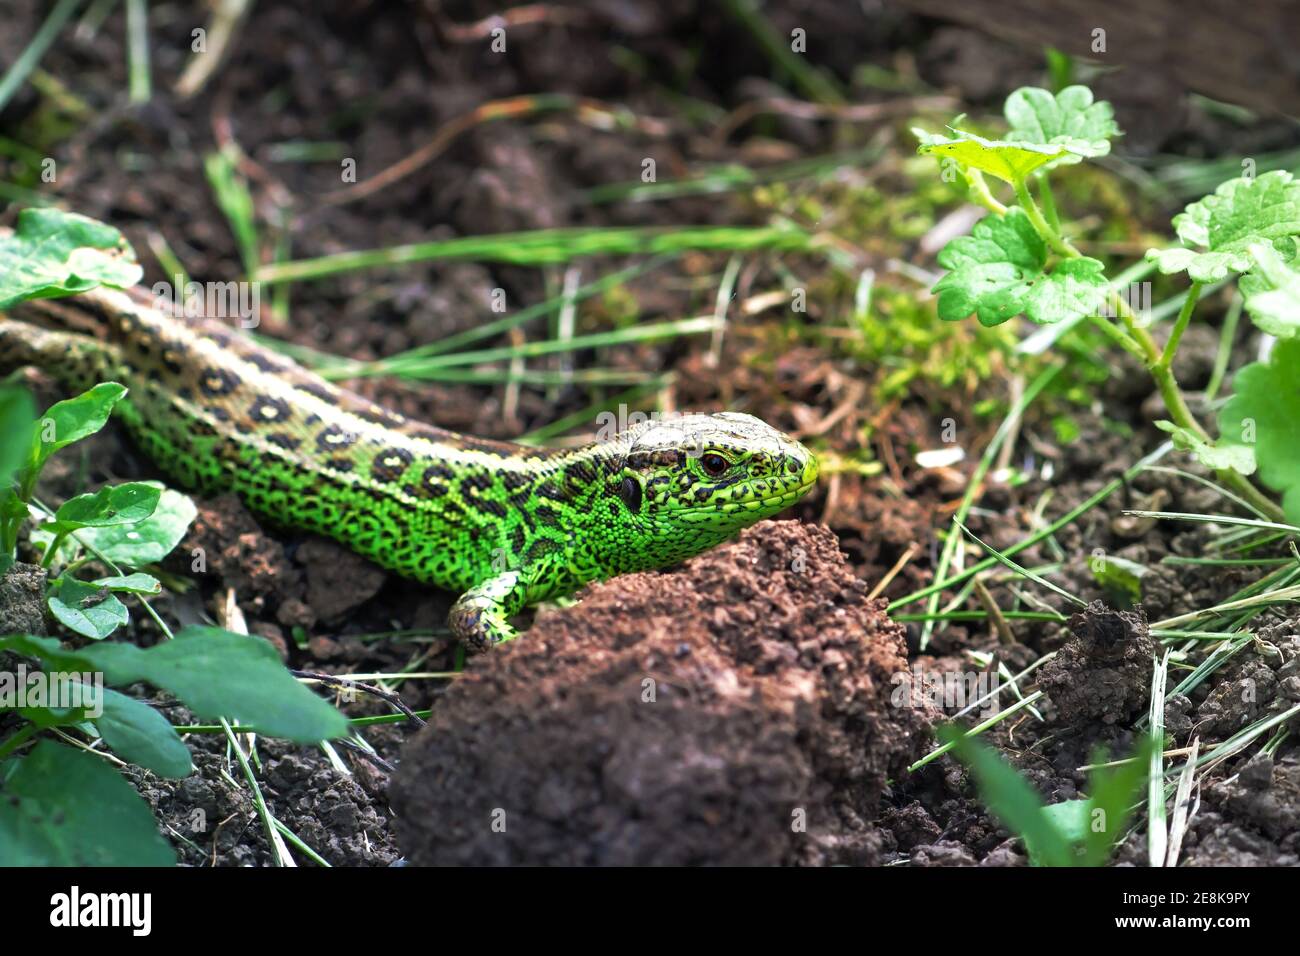 Close up of Sand lizard Lacerta agilis hiding in the garden amongst grass and soil Stock Photo